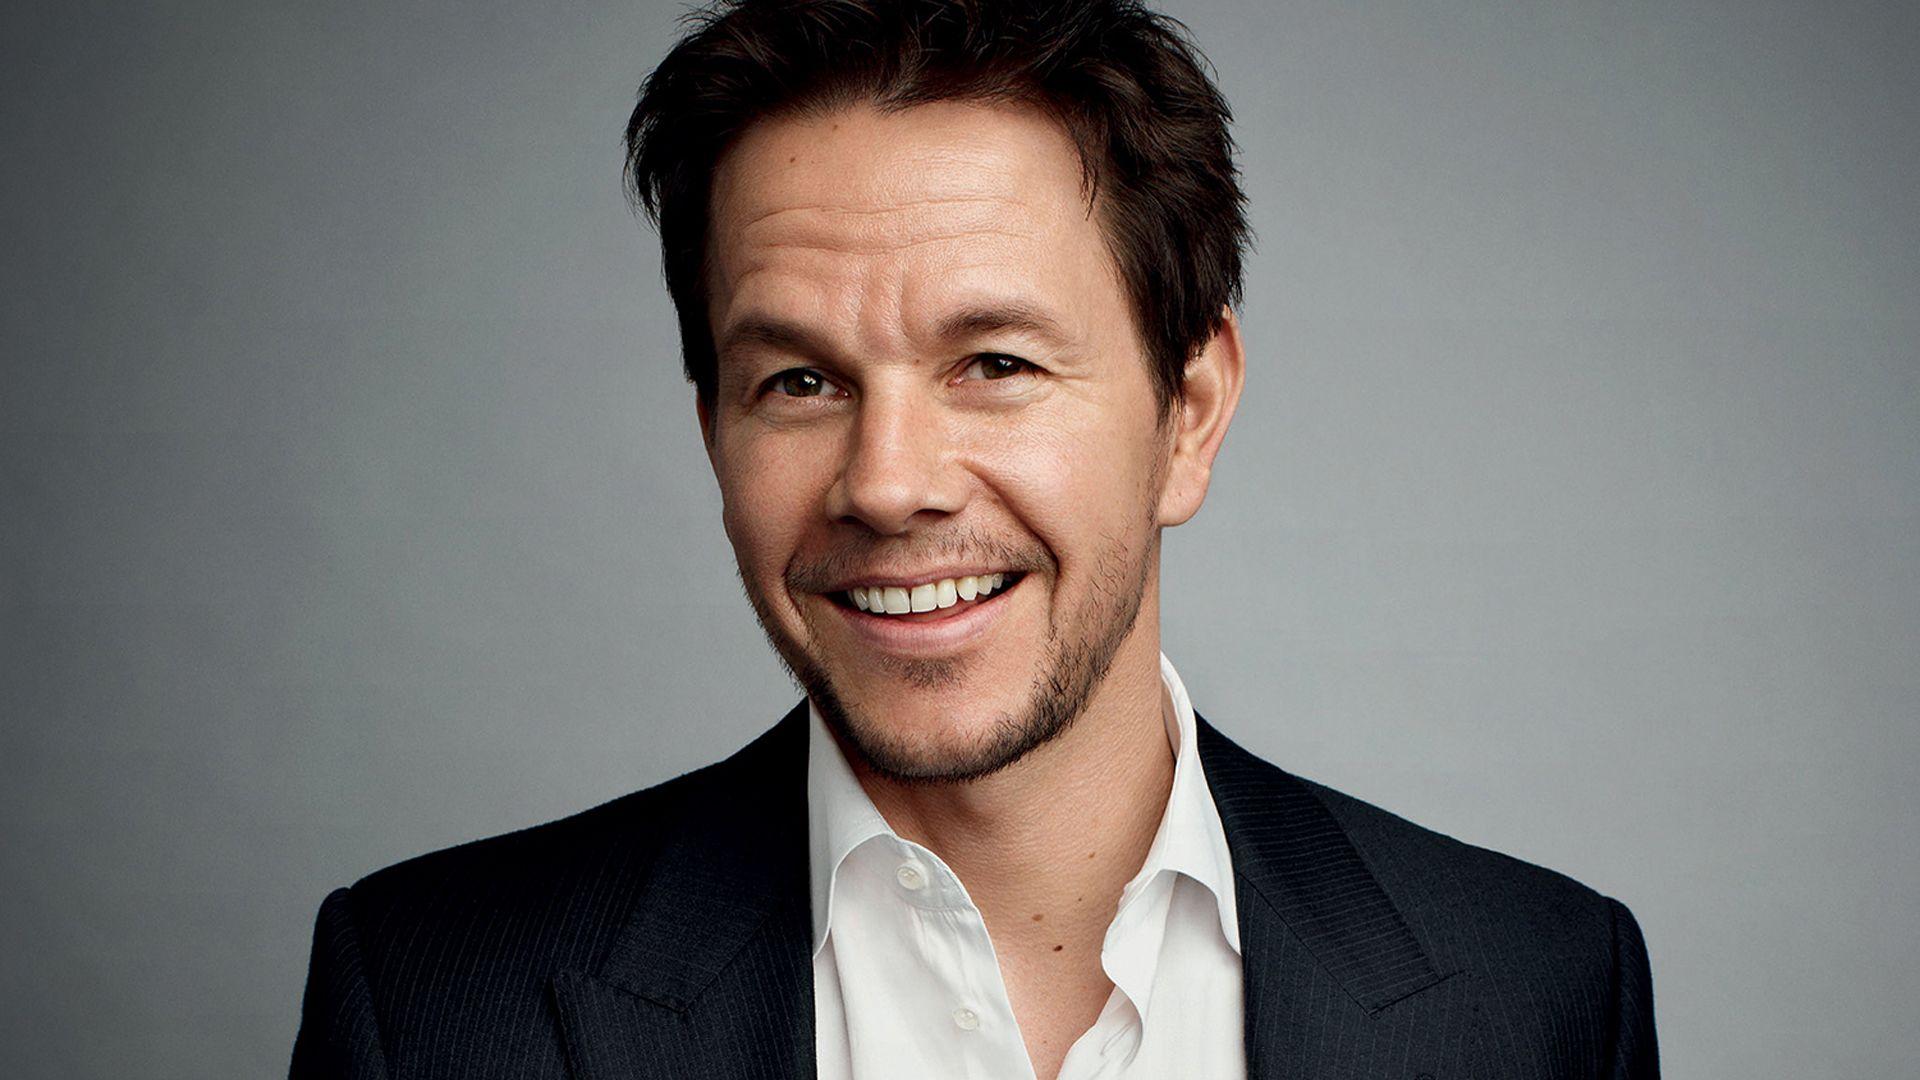 Mark Wahlberg Smile Wallpaper 50254 1920x1080 px